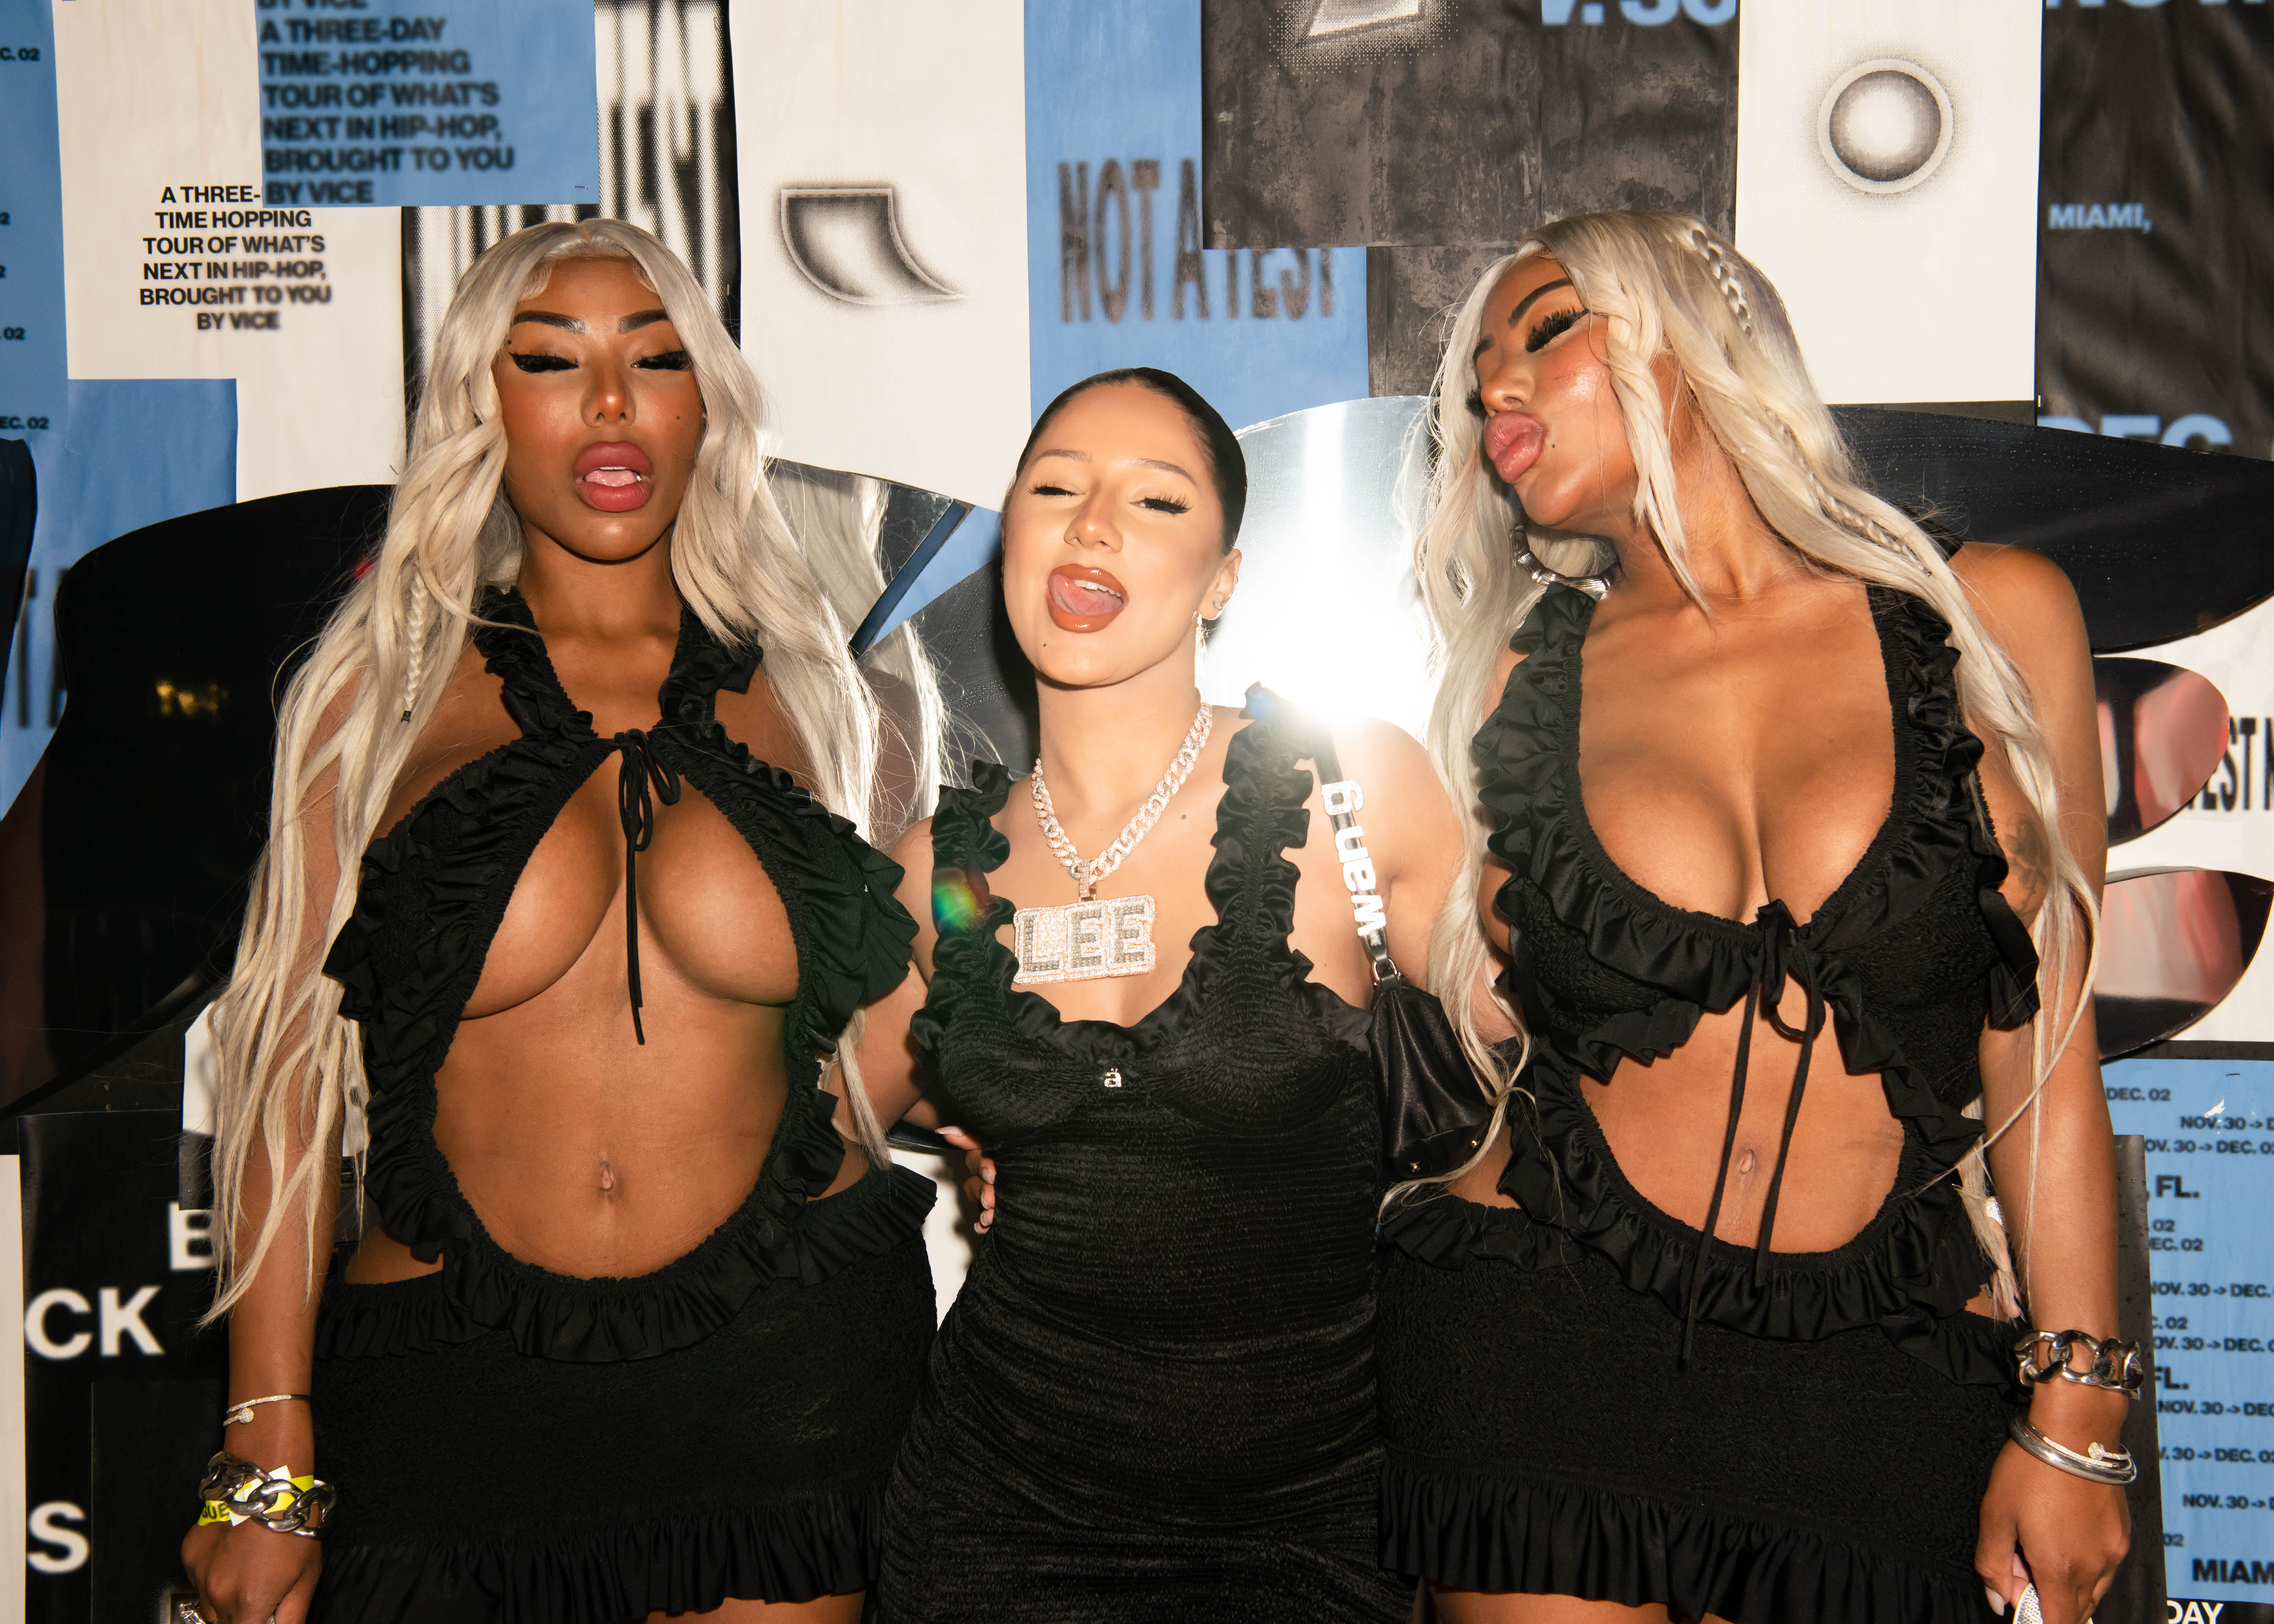 Clermont Twins at Art Basel Miami